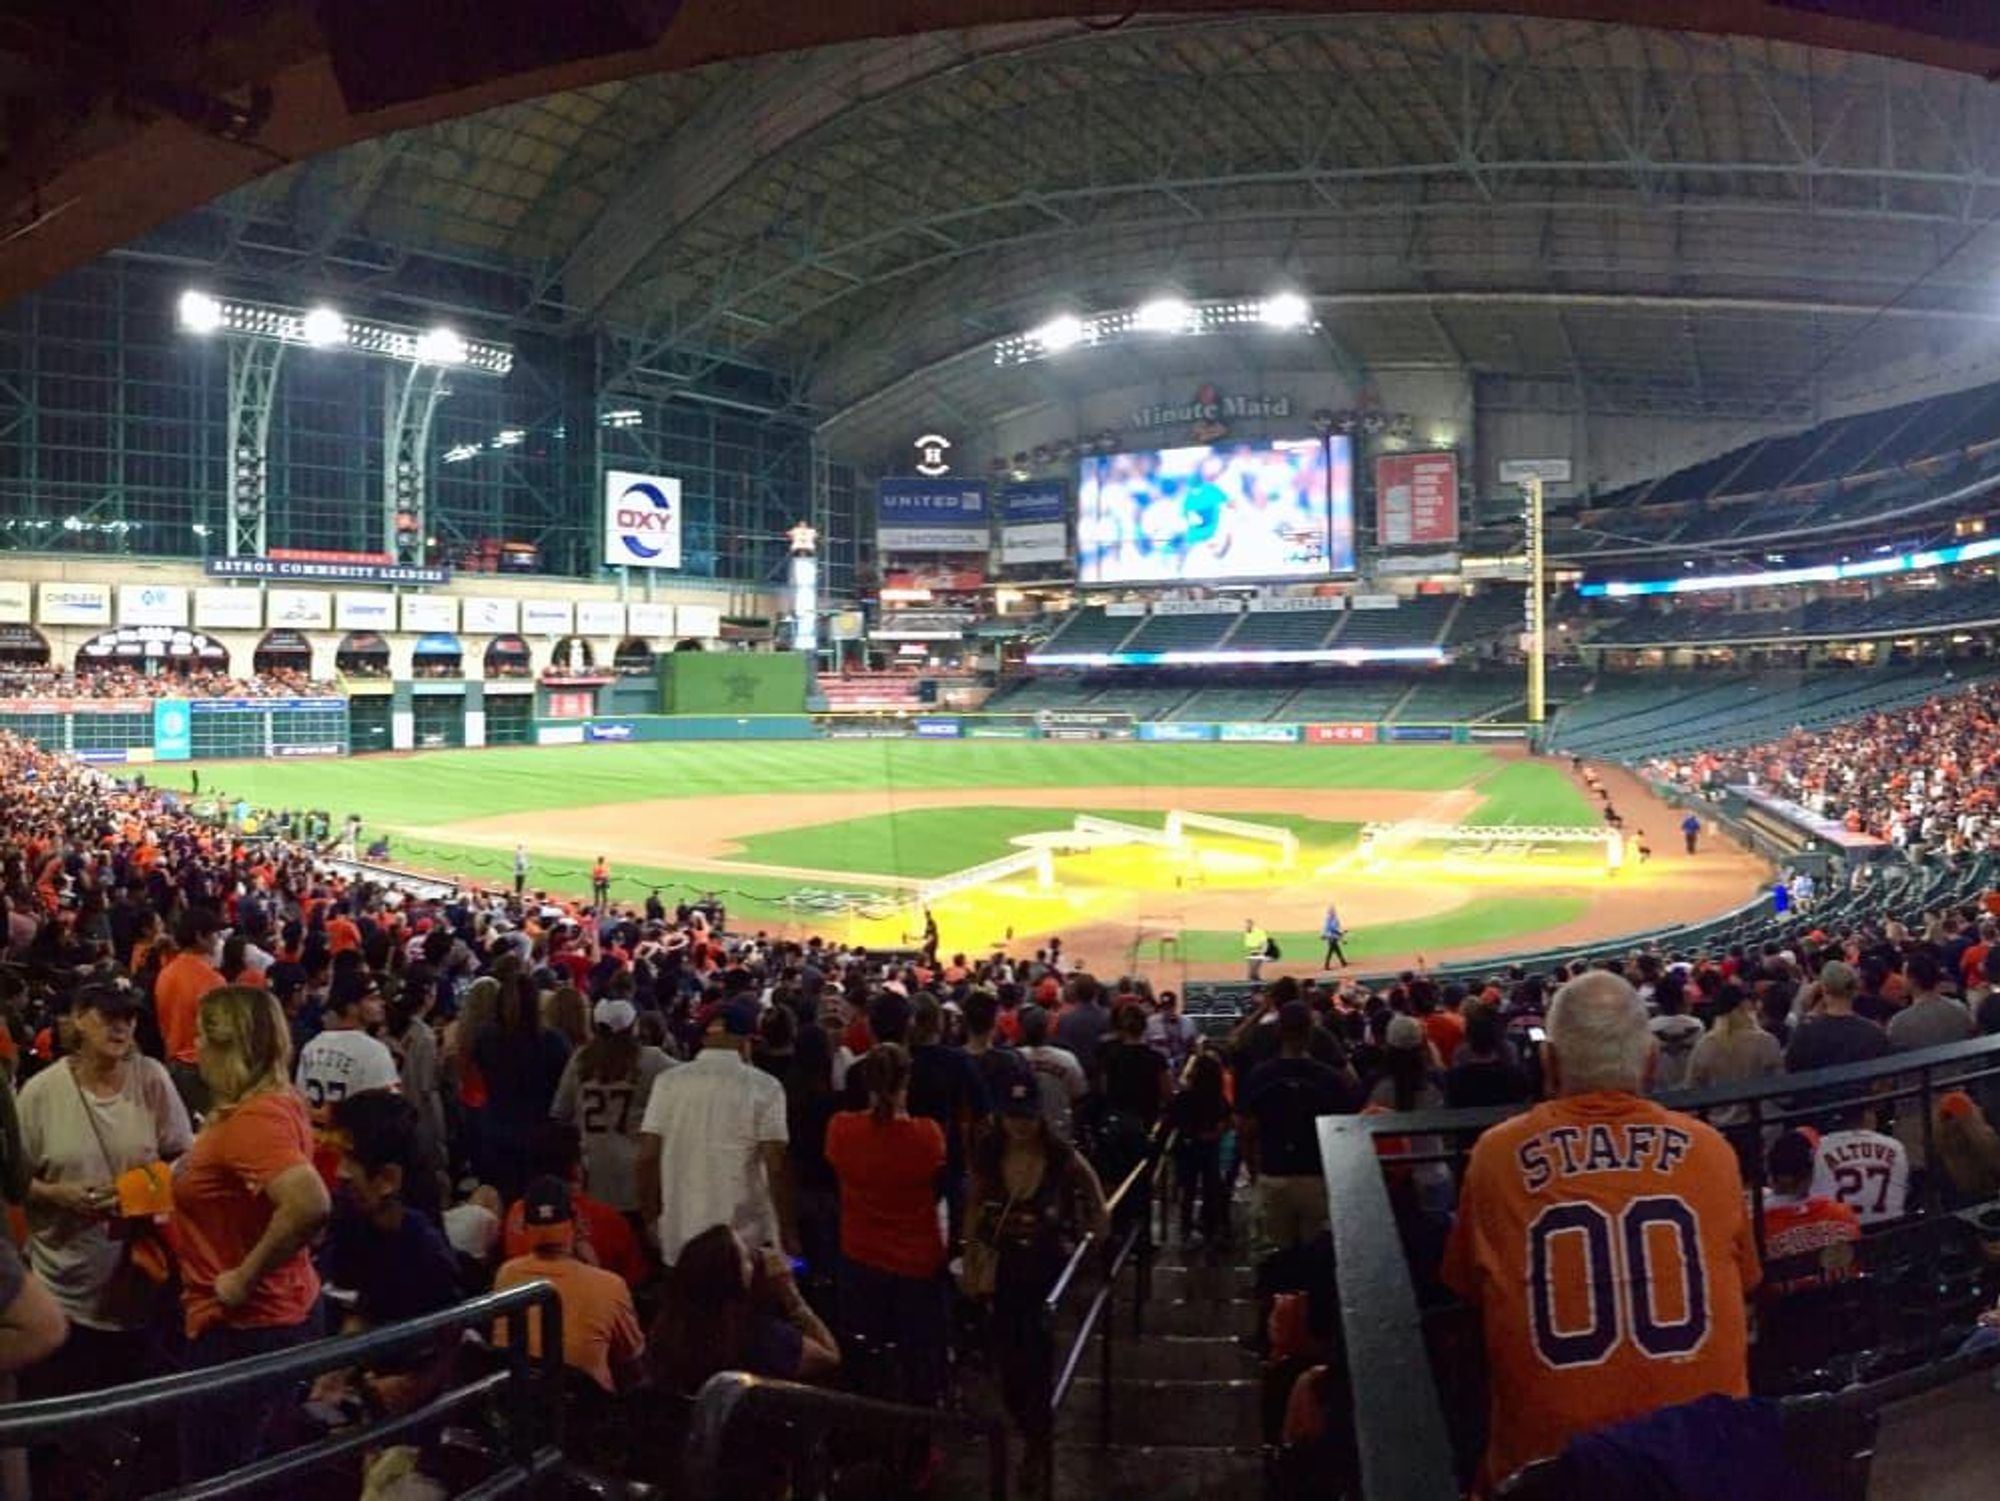 BASEBALL GAME DAY: February 1-3 at Minute Maid Park in Houston